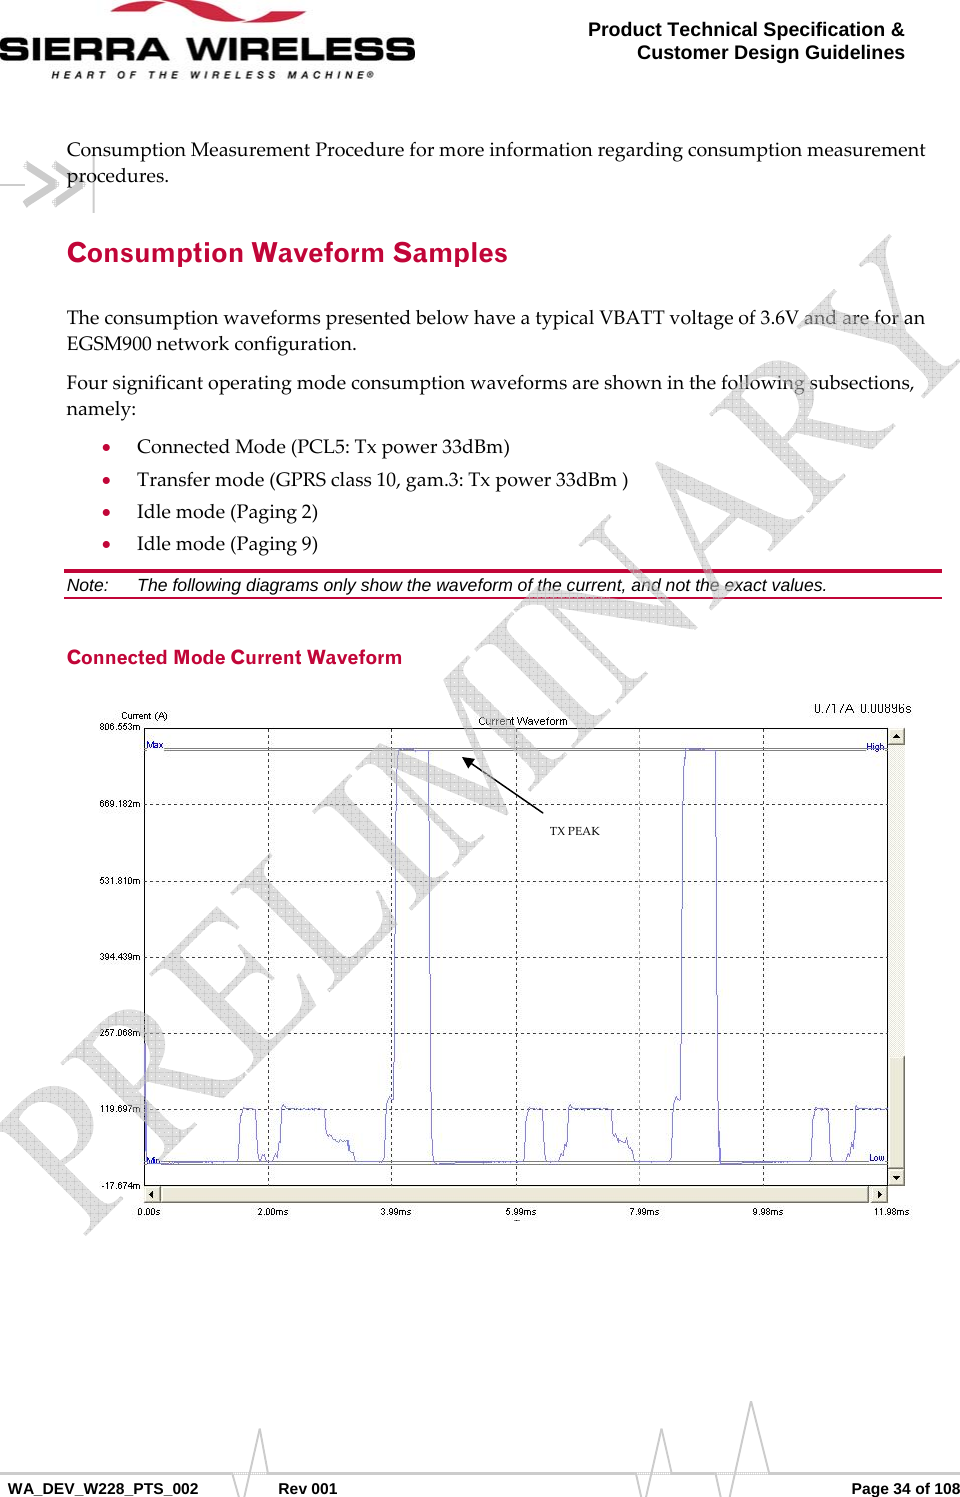      WA_DEV_W228_PTS_002 Rev 001  Page 34 of 108 Product Technical Specification &amp; Customer Design Guidelines ConsumptionMeasurementProcedureformoreinformationregardingconsumptionmeasurementprocedures.Consumption Waveform Samples TheconsumptionwaveformspresentedbelowhaveatypicalVBATTvoltageof3.6VandareforanEGSM900networkconfiguration.Foursignificantoperatingmodeconsumptionwaveformsareshowninthefollowingsubsections,namely:• ConnectedMode(PCL5:Txpower33dBm)• Transfermode(GPRSclass10,gam.3:Txpower33dBm)• Idlemode(Paging2)• Idlemode(Paging9)Note:   The following diagrams only show the waveform of the current, and not the exact values. Connected Mode Current Waveform TXPEAK   